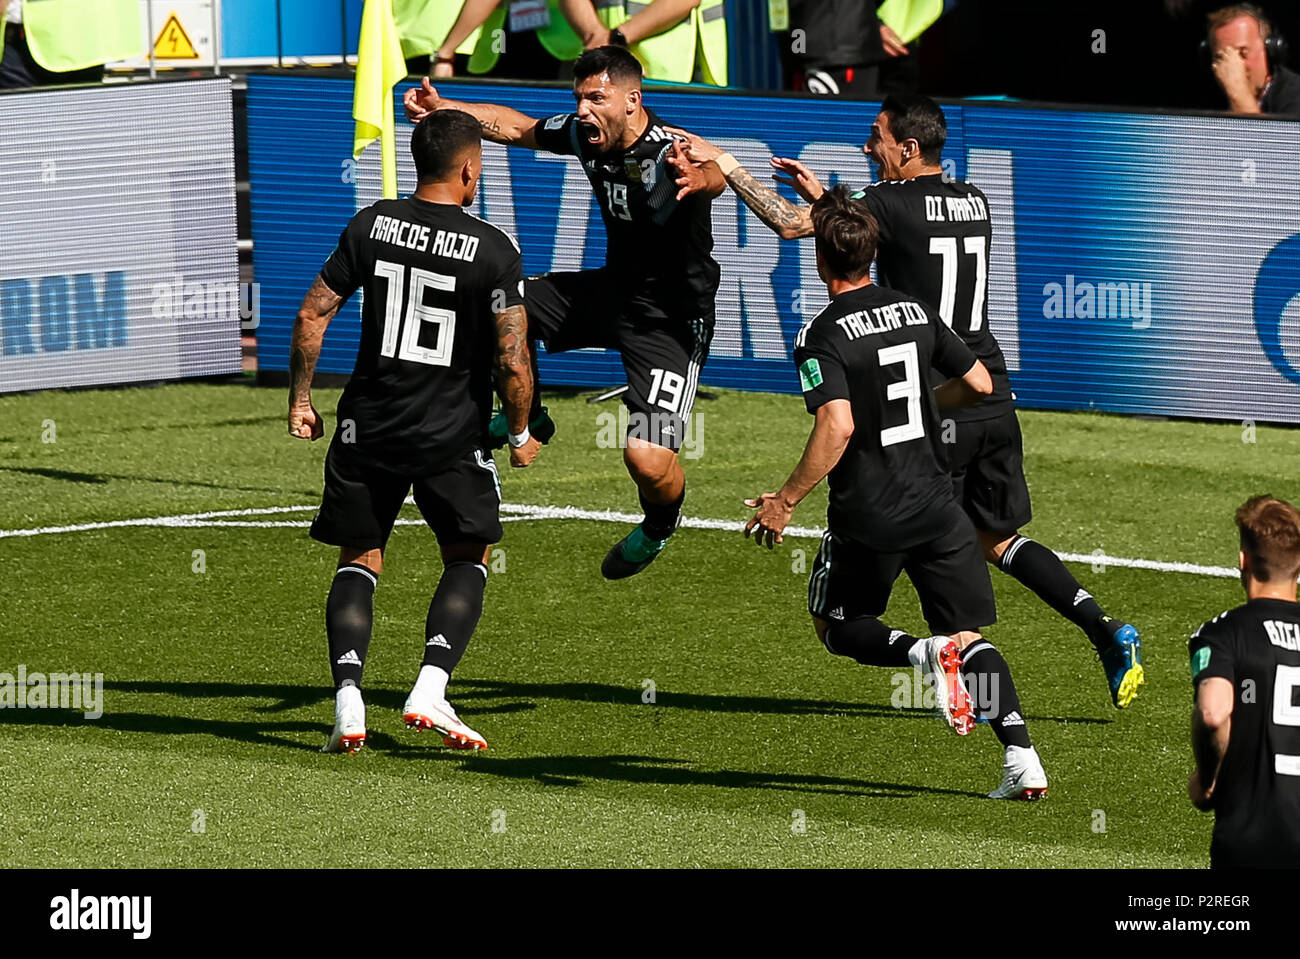 Moscow, Russia. 16th Jun, 2018. Sergio Aguero of Argentina celebrates after scoring his side's first goal to make the score 1-0 during the 2018 FIFA World Cup Group D match between Argentina and Iceland at Spartak Stadium on June 16th 2018 in Moscow, Russia. (Photo by Daniel Chesterton/phcimages.com) Credit: PHC Images/Alamy Live News Stock Photo